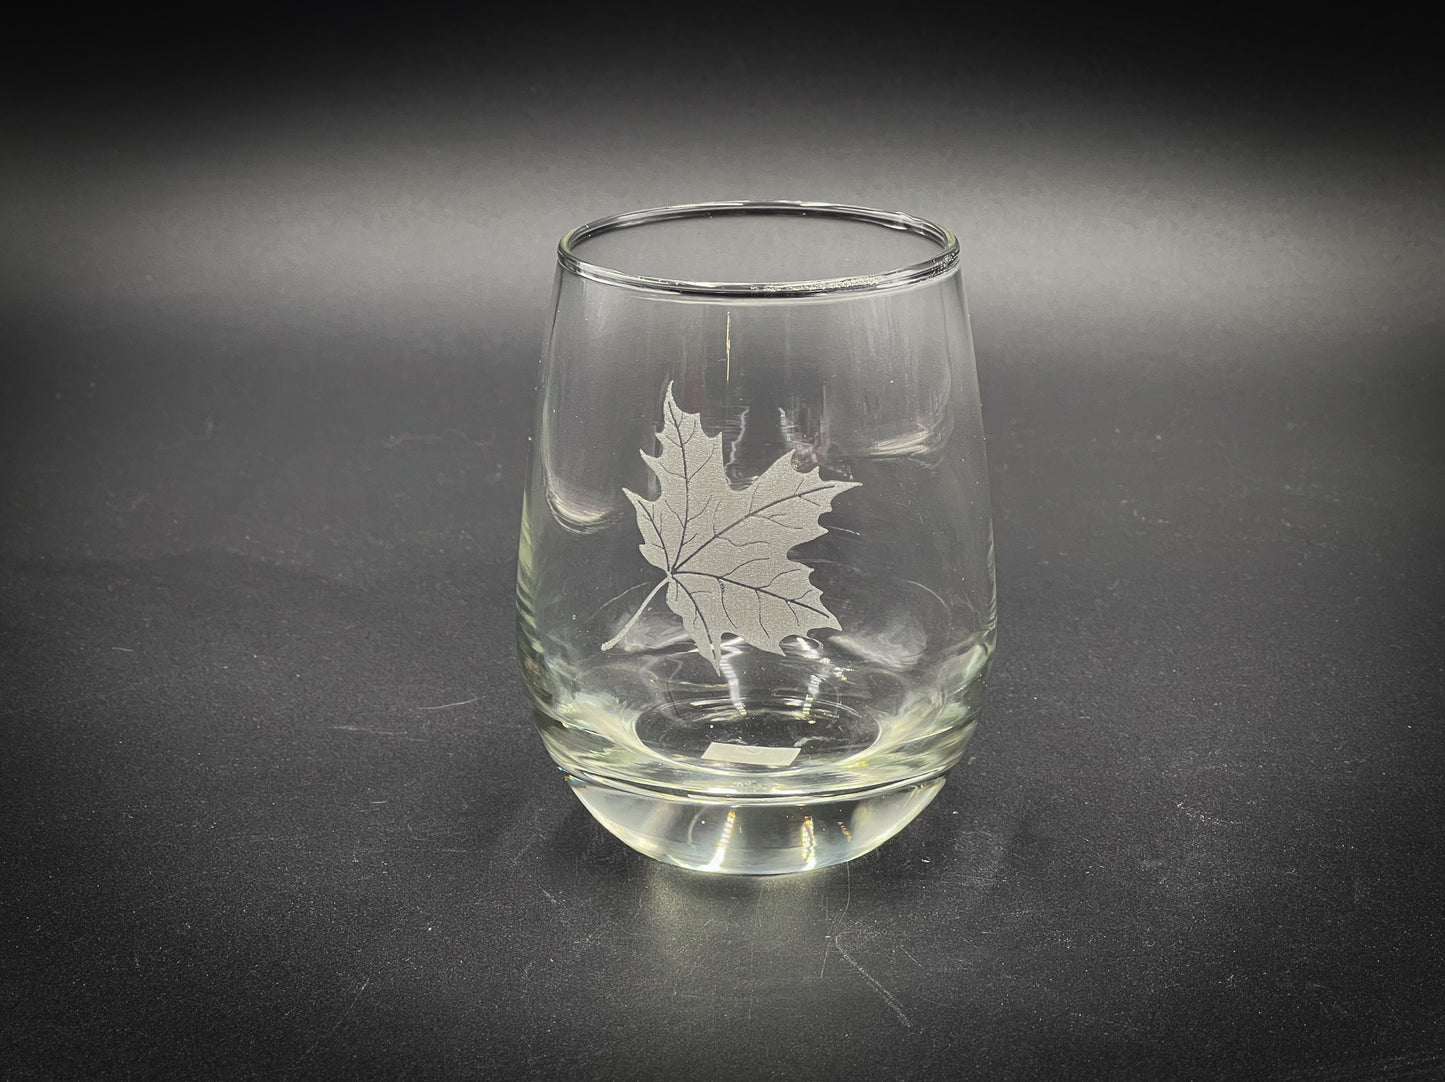 a glass with a maple leaf etched on it